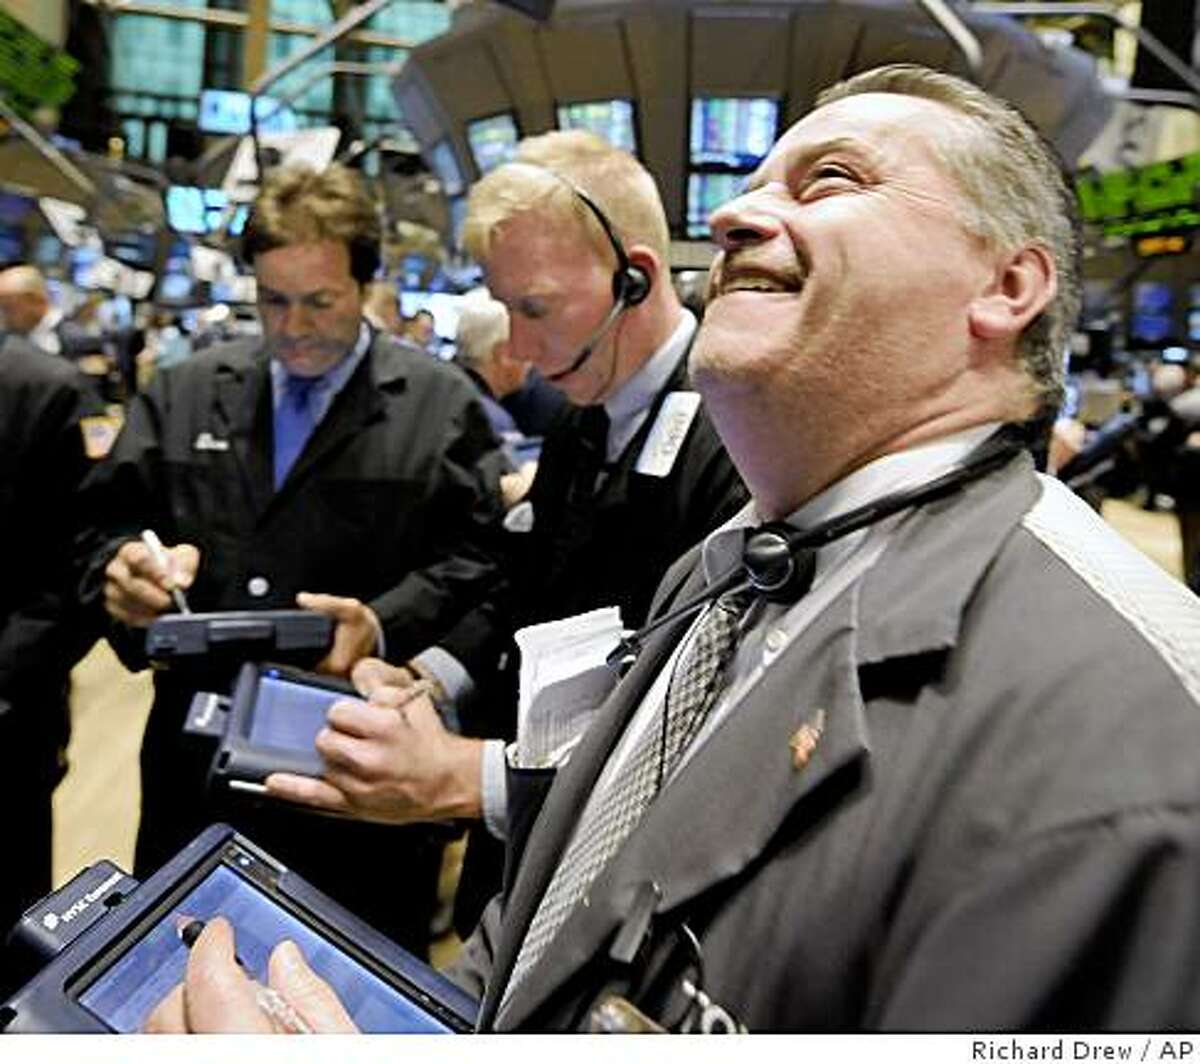 Trader Thomas Riley, right, smiles as he works on the floor of the New York Stock Exchange, Monday Oct. 13, 2008. Wall Street stormed back from last week's devastating losses Monday, sending the Dow Jones industrials soaring a nearly inconceivable 936 points after major governments' plans to support the global banking system reassured distraught investors. (AP Photo/Richard Drew)